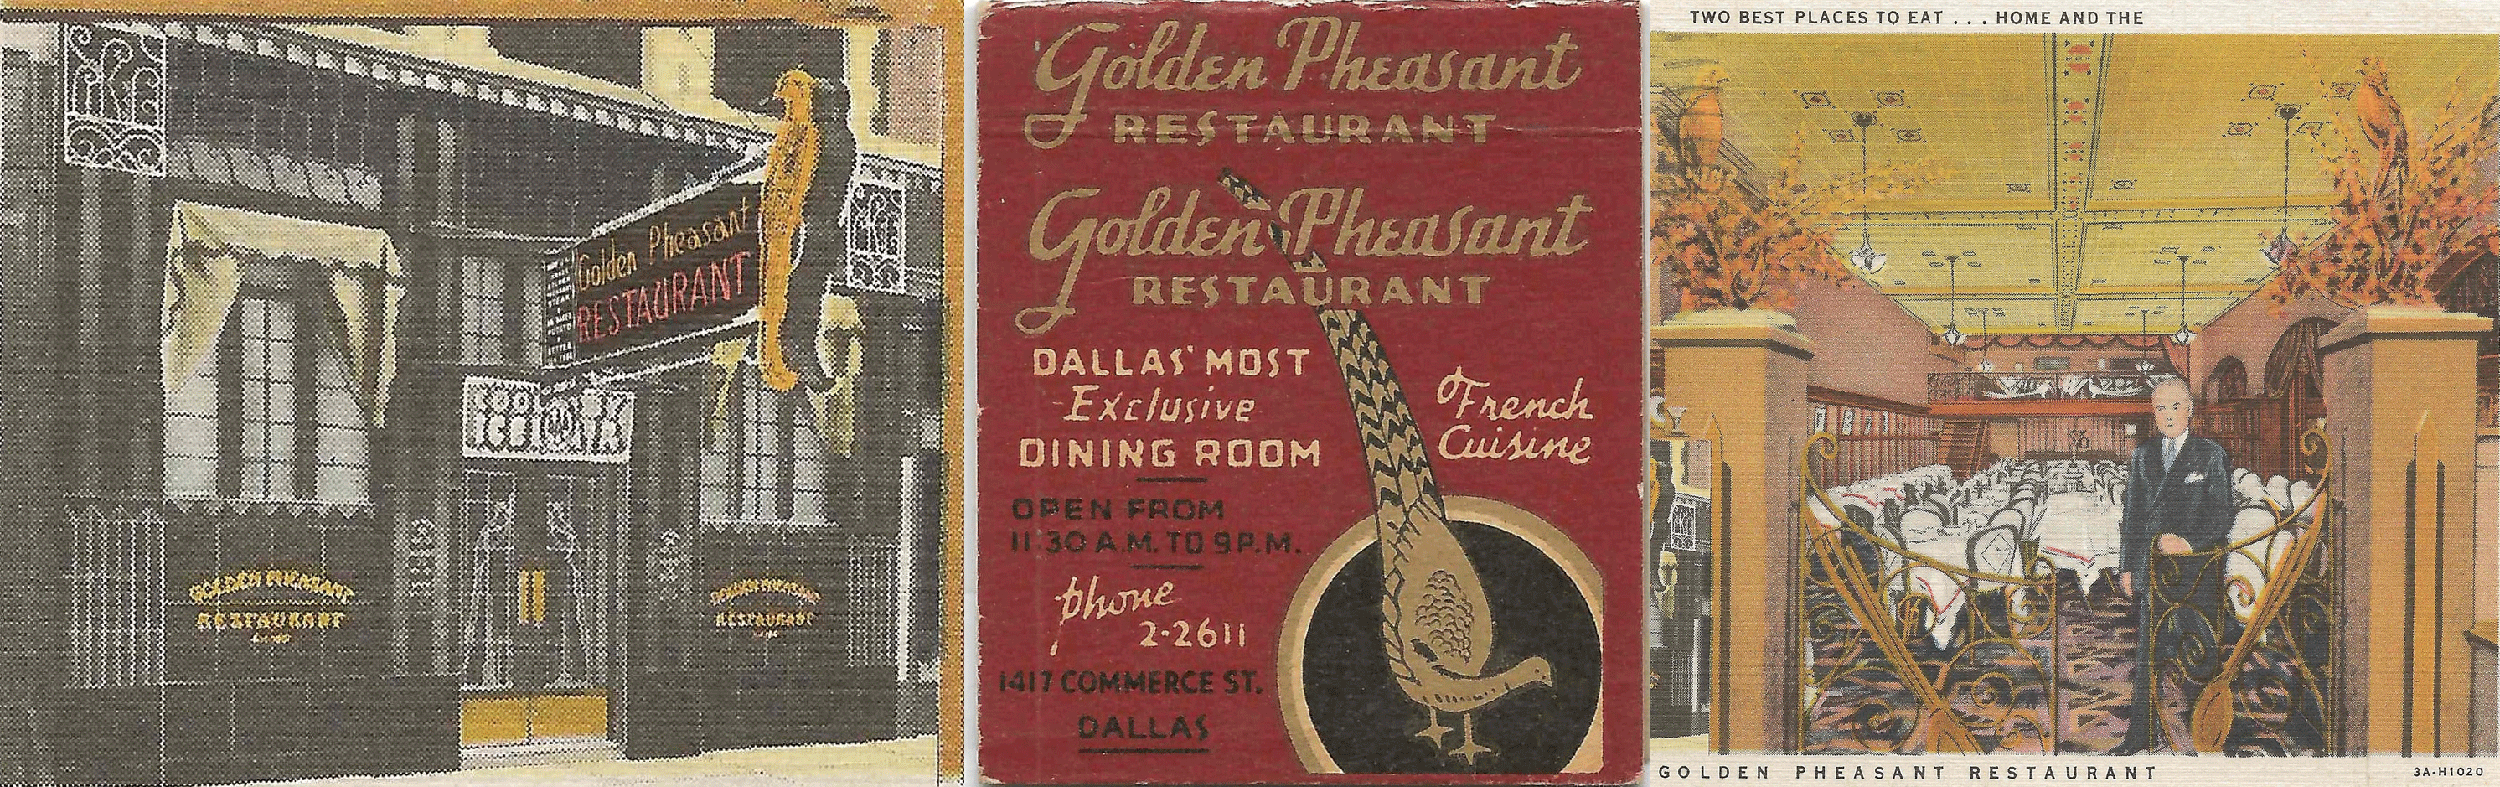 History of Dallas Food: The Golden Pheasant